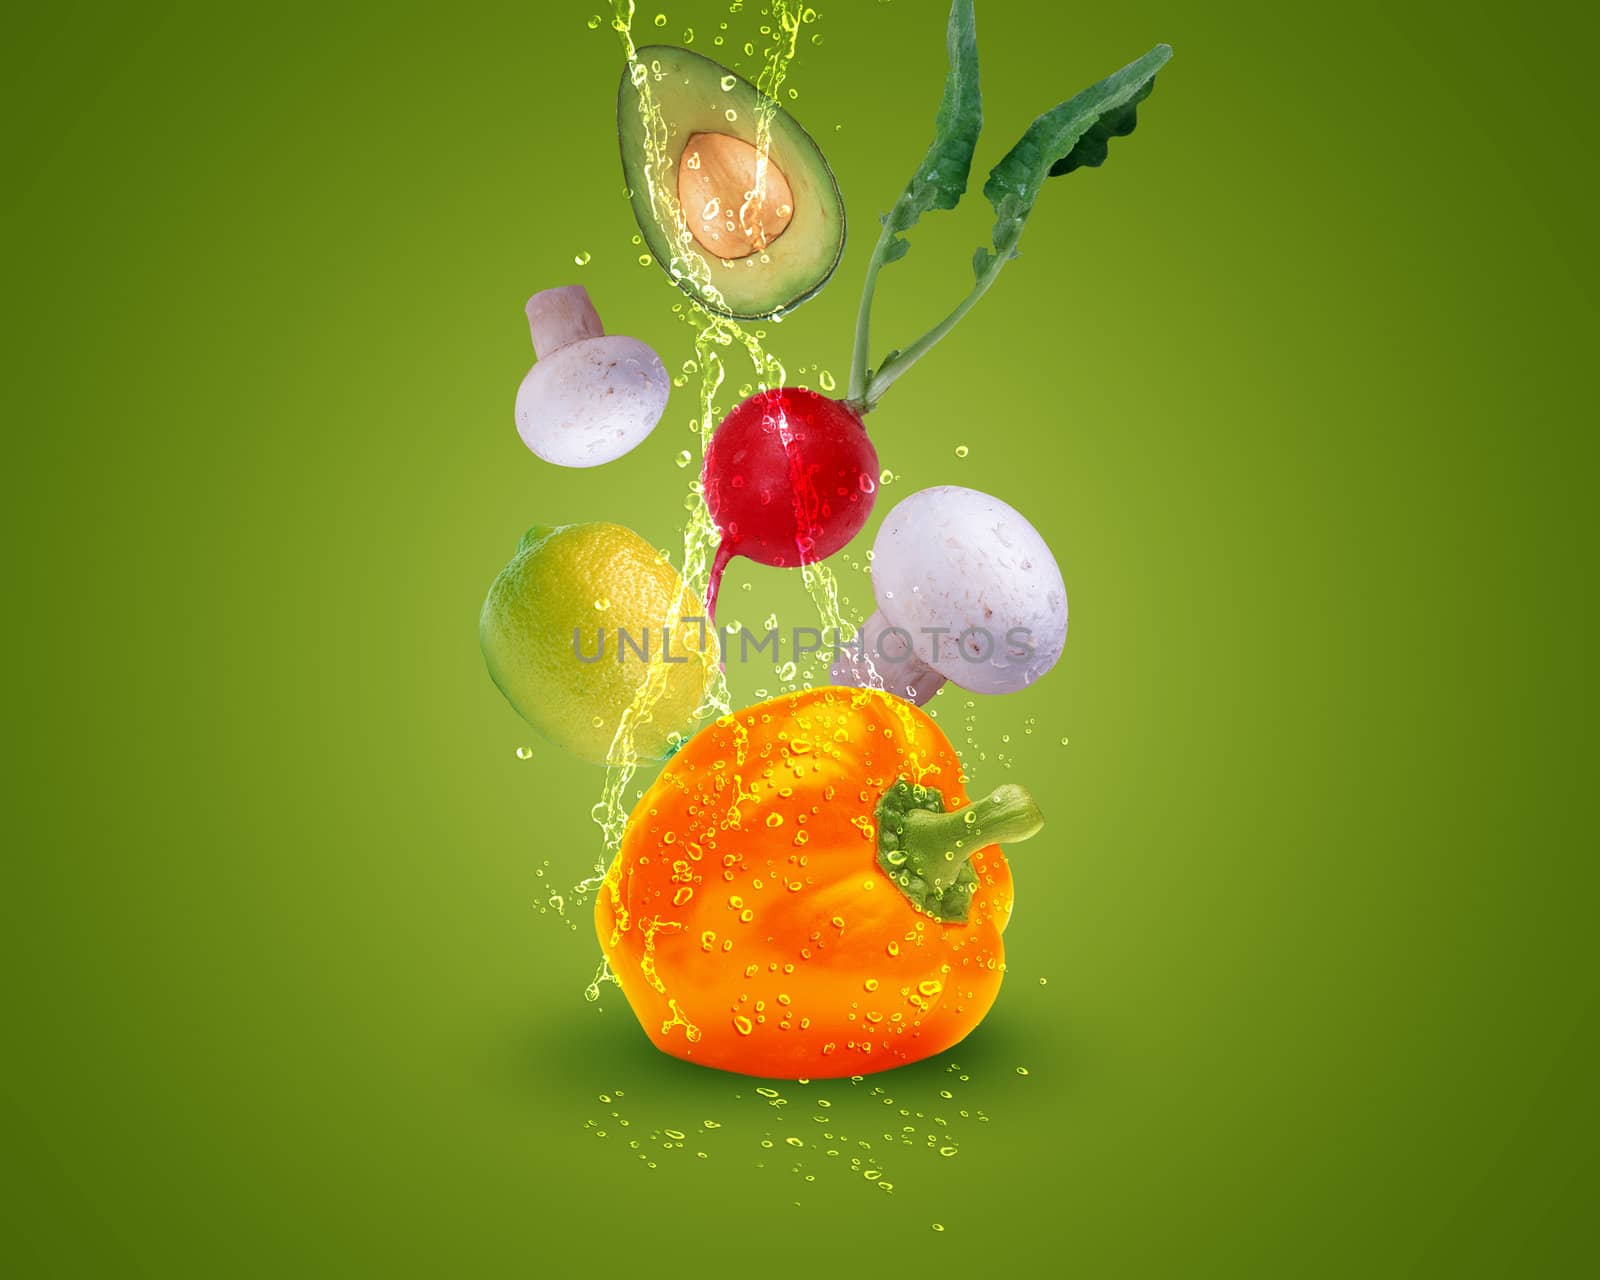 Fresh vegetables with water splashes on blue background.